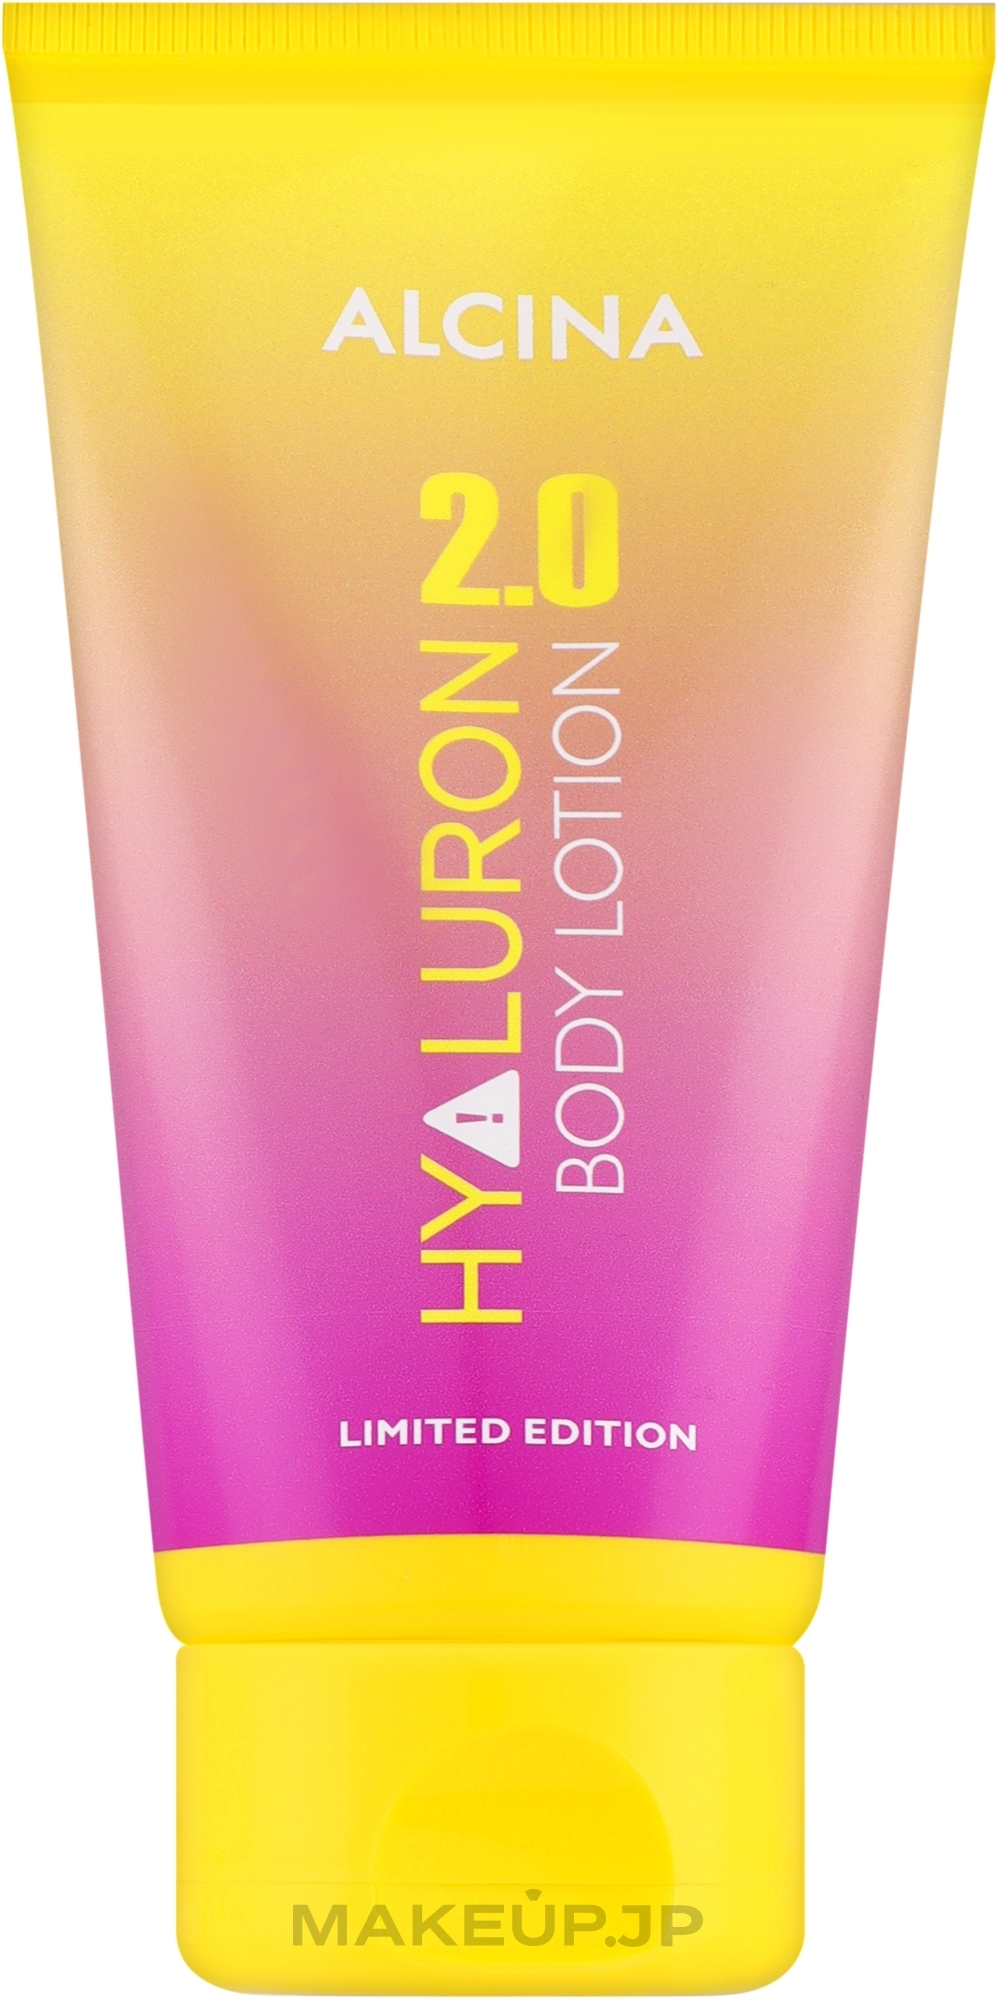 Body Lotion - Alcina Hyaluron 2.0 Body Lotion Limited Edition — photo 150 ml